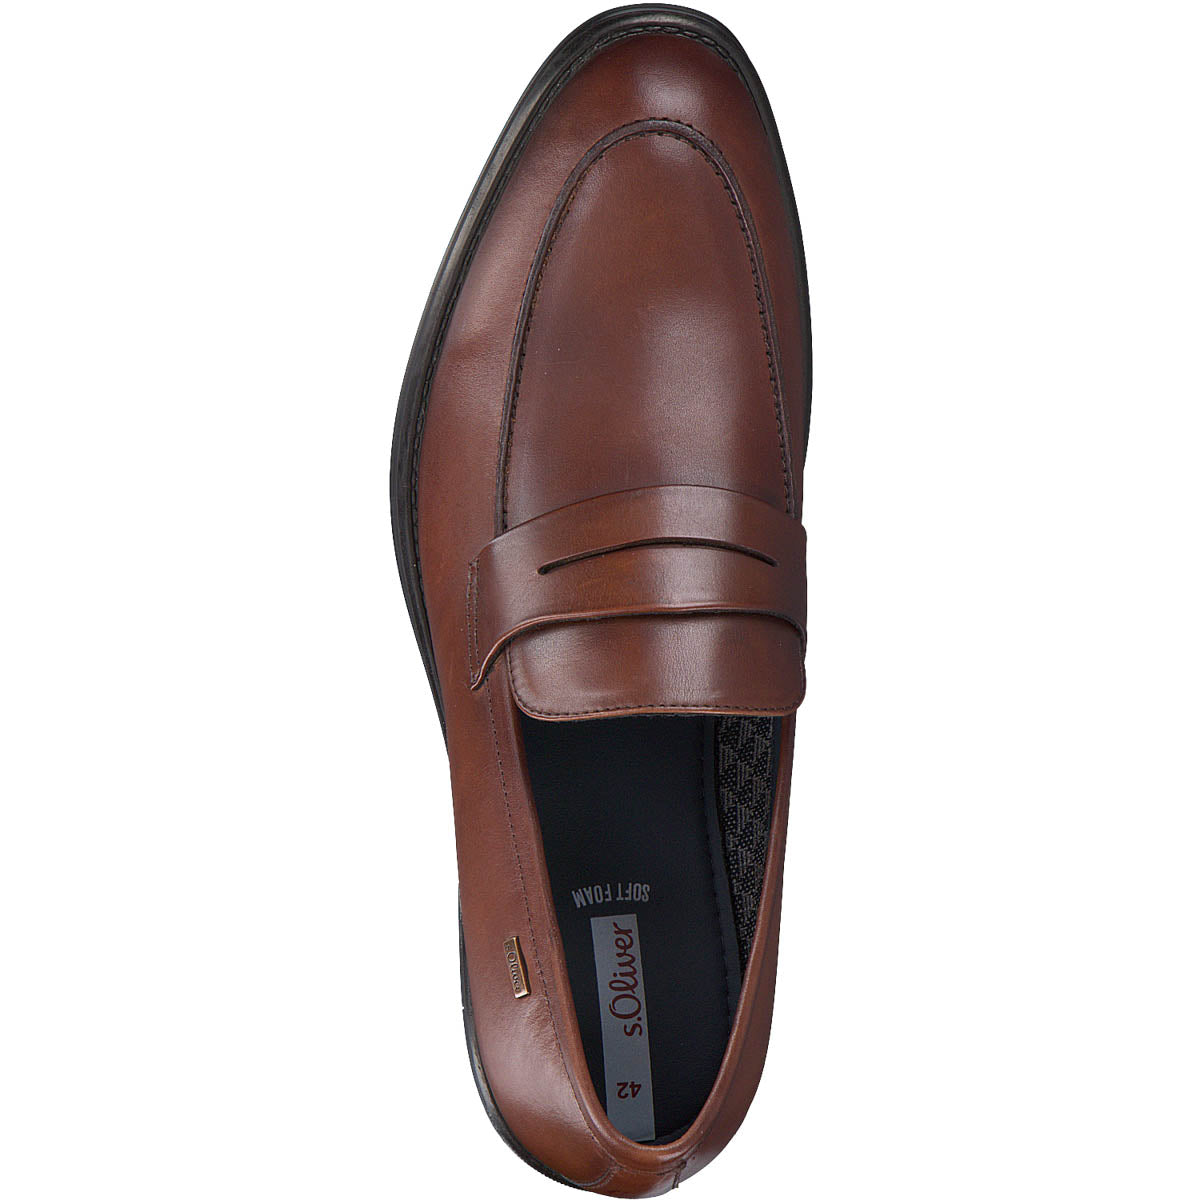 S.Oliver Men's Classic Brown Leather Penny Loafers